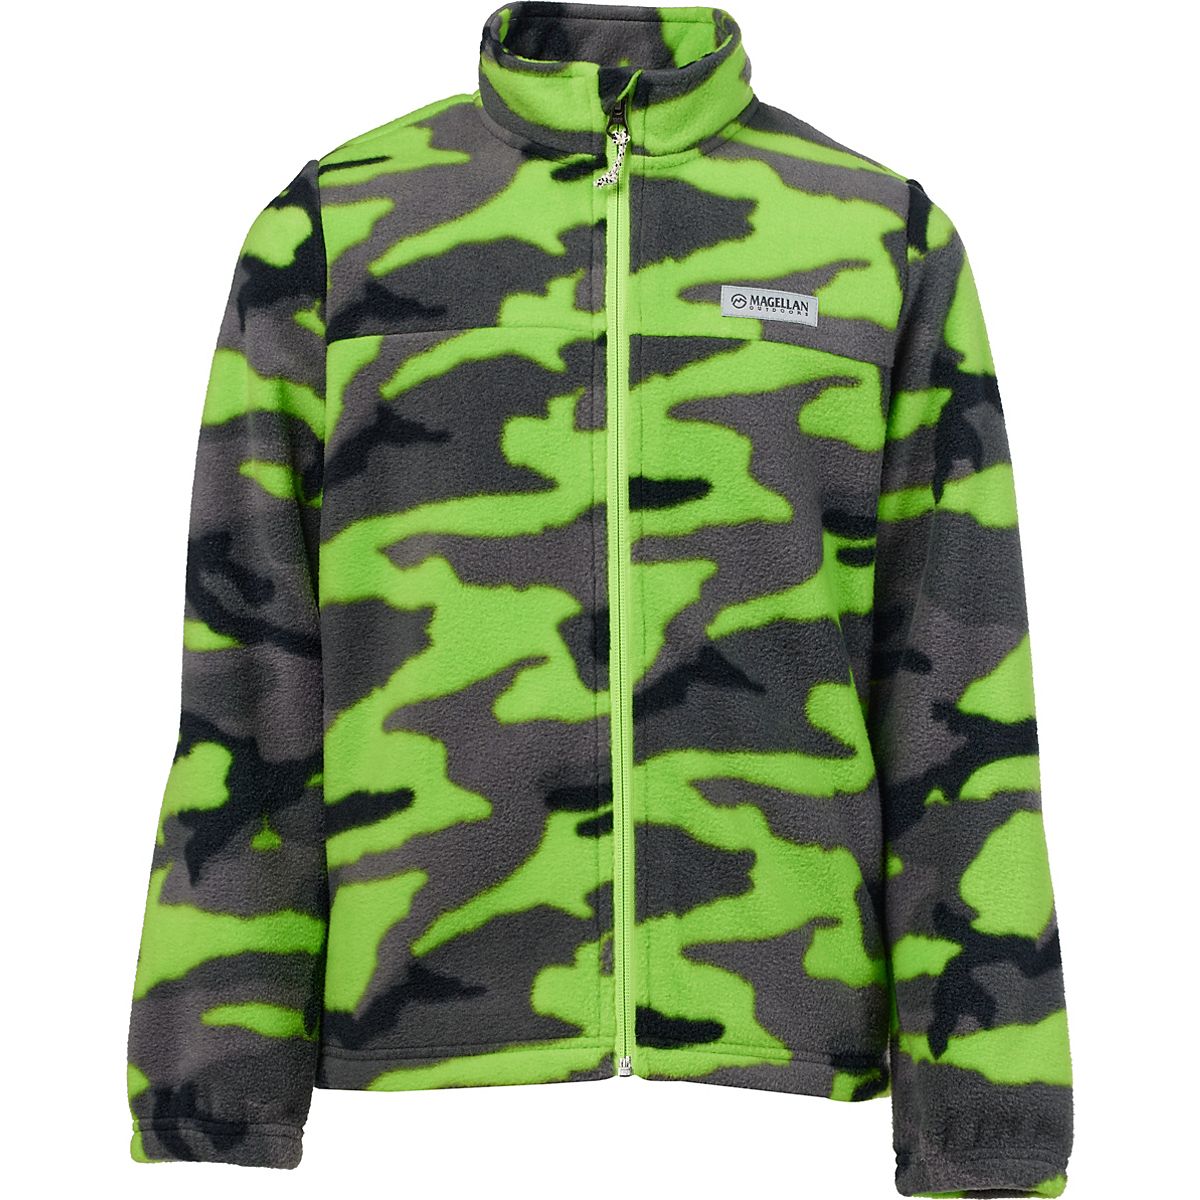 Magellan Outdoors Boys' Clothing On Sale Up To 90% Off Retail